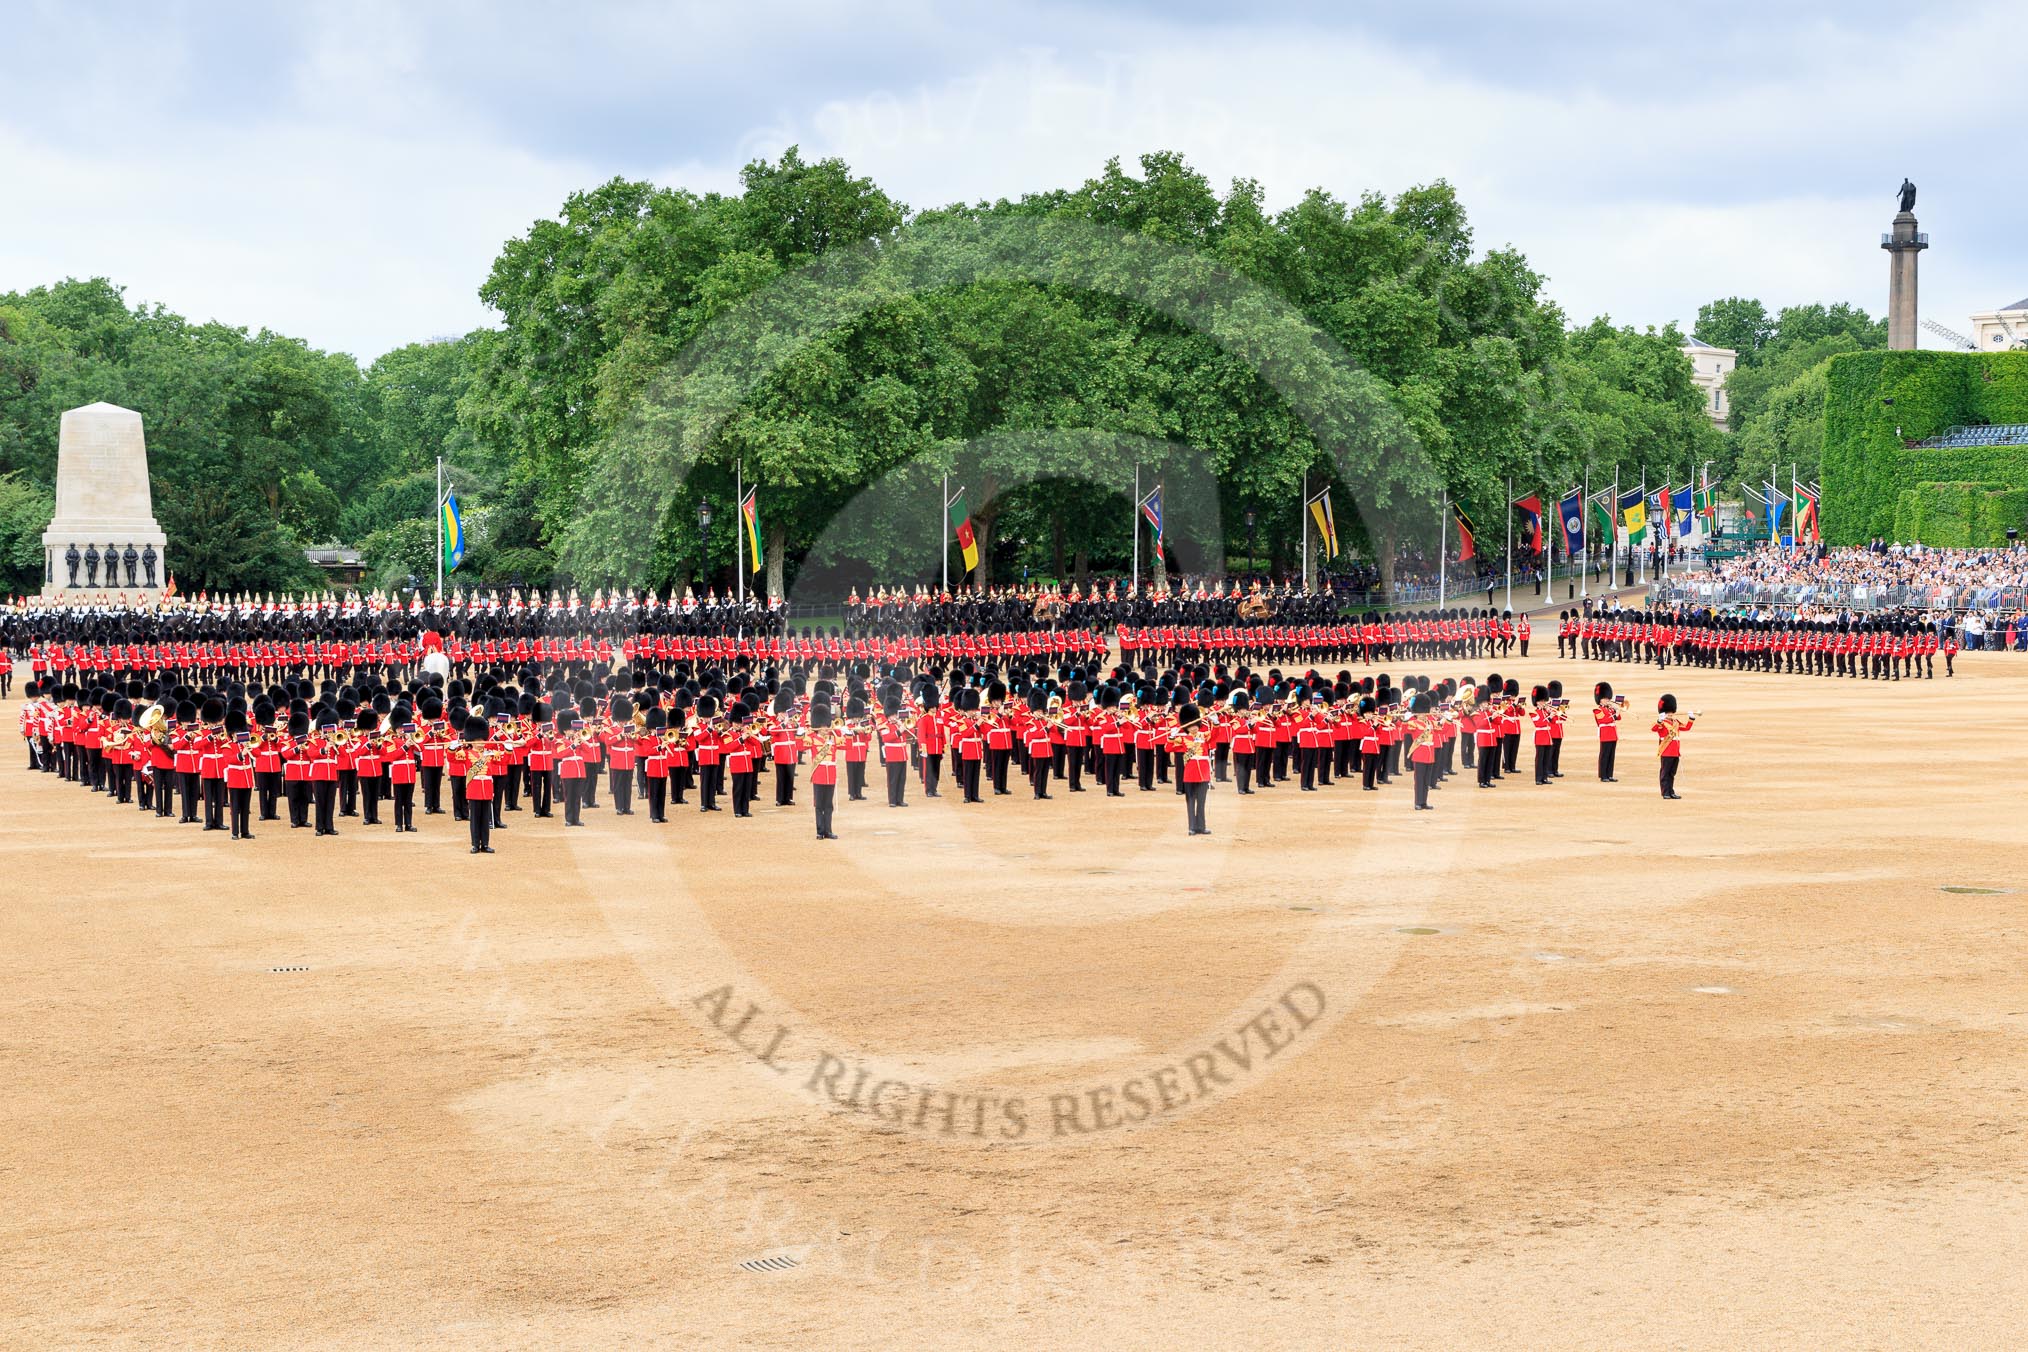 during The Colonel's Review {iptcyear4} (final rehearsal for Trooping the Colour, The Queen's Birthday Parade)  at Horse Guards Parade, Westminster, London, 2 June 2018, 11:52.